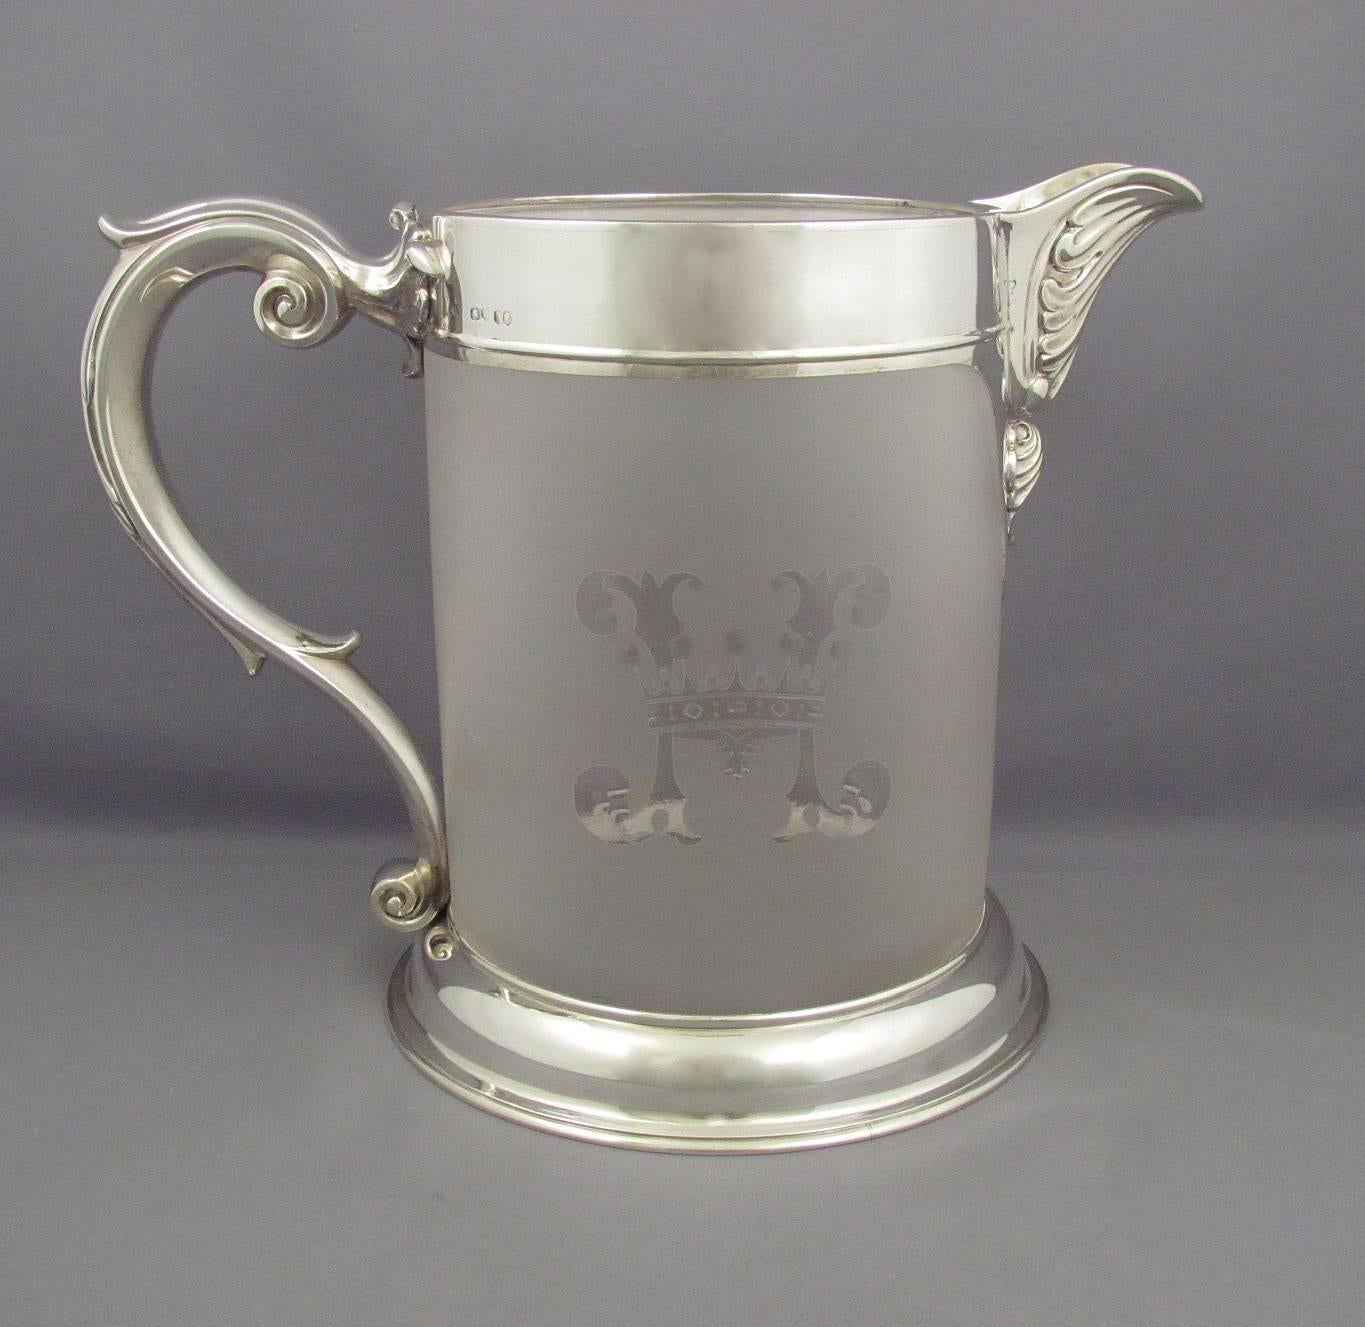 A rare and fine quality Victorian sterling silver and frosted glass beer jug with two matching mugs by John Figg, London, 1855-1857. Each piece engraved with an H and a coronet. Measures: 9" (22.9cm) high.